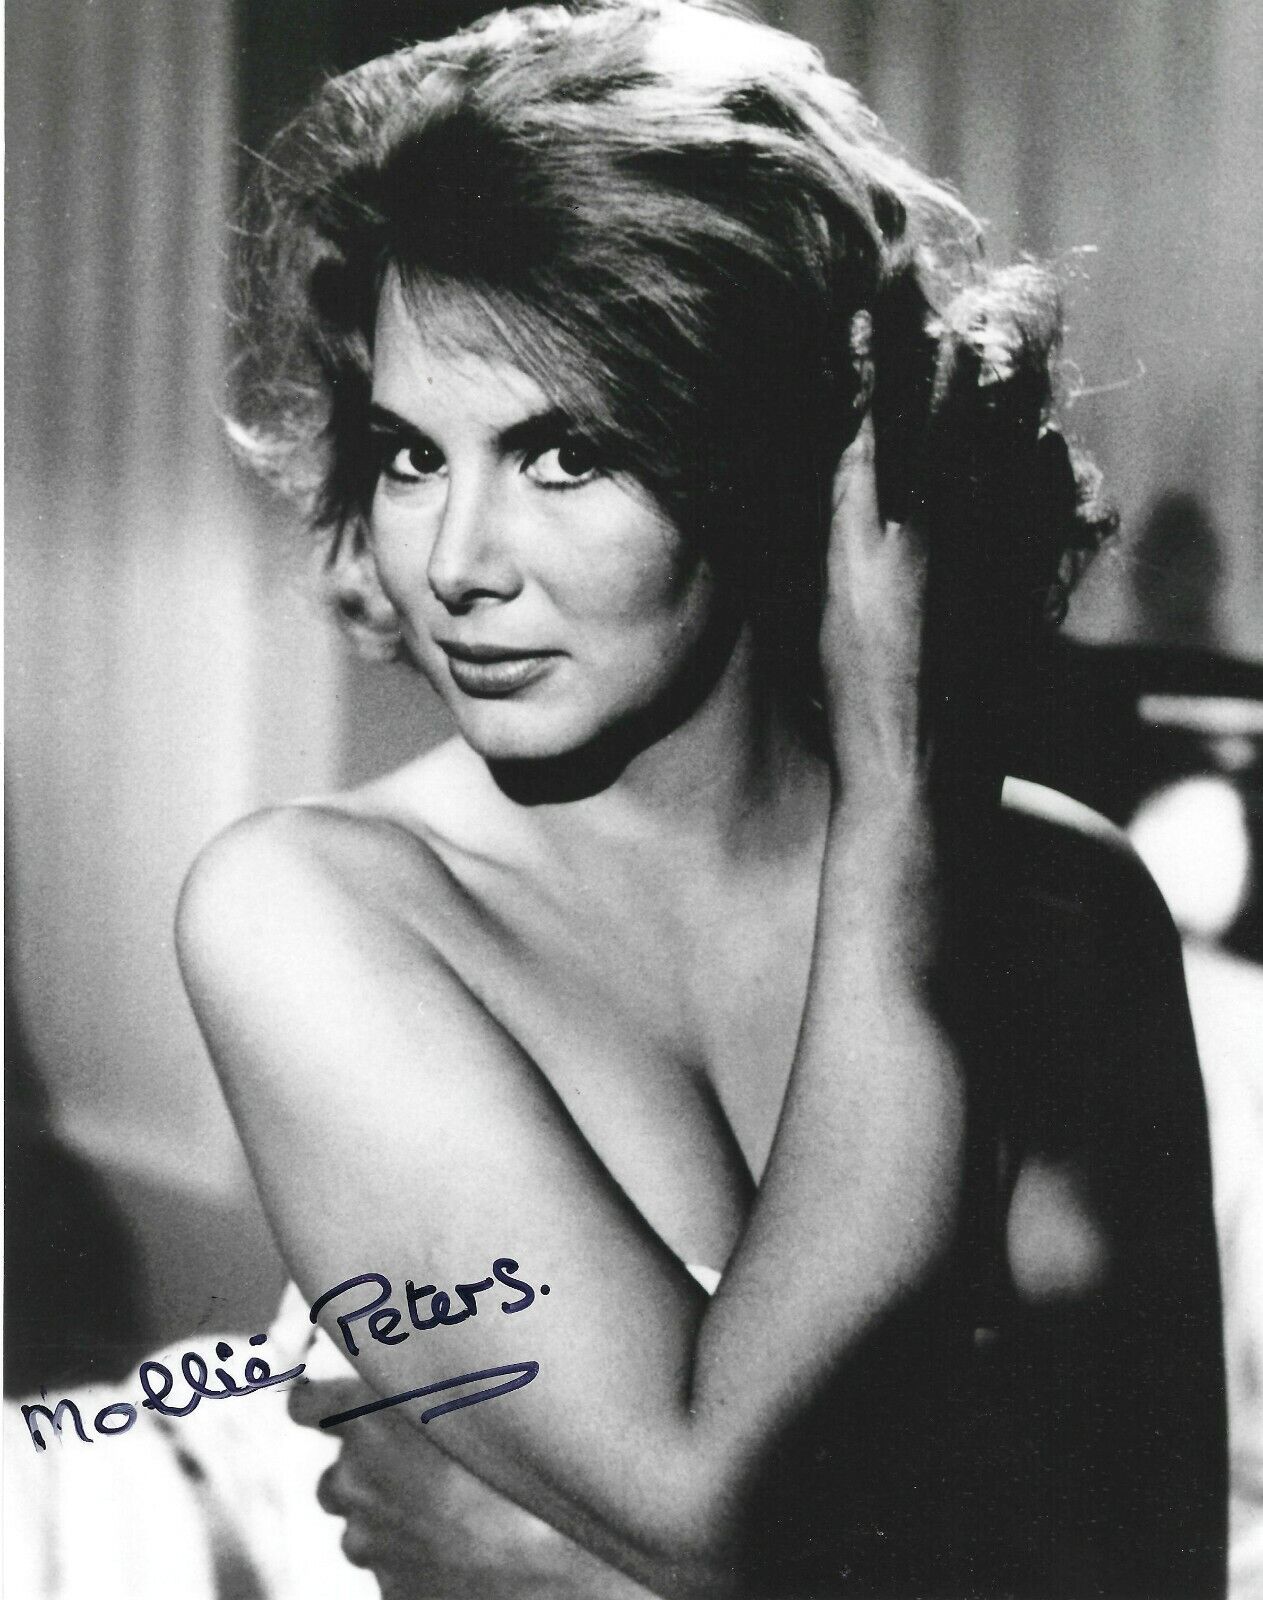 MOLLIE PETERS SIGNED 007 JAMES BOND 8x10 Photo Poster painting - UACC & AFTAL RD